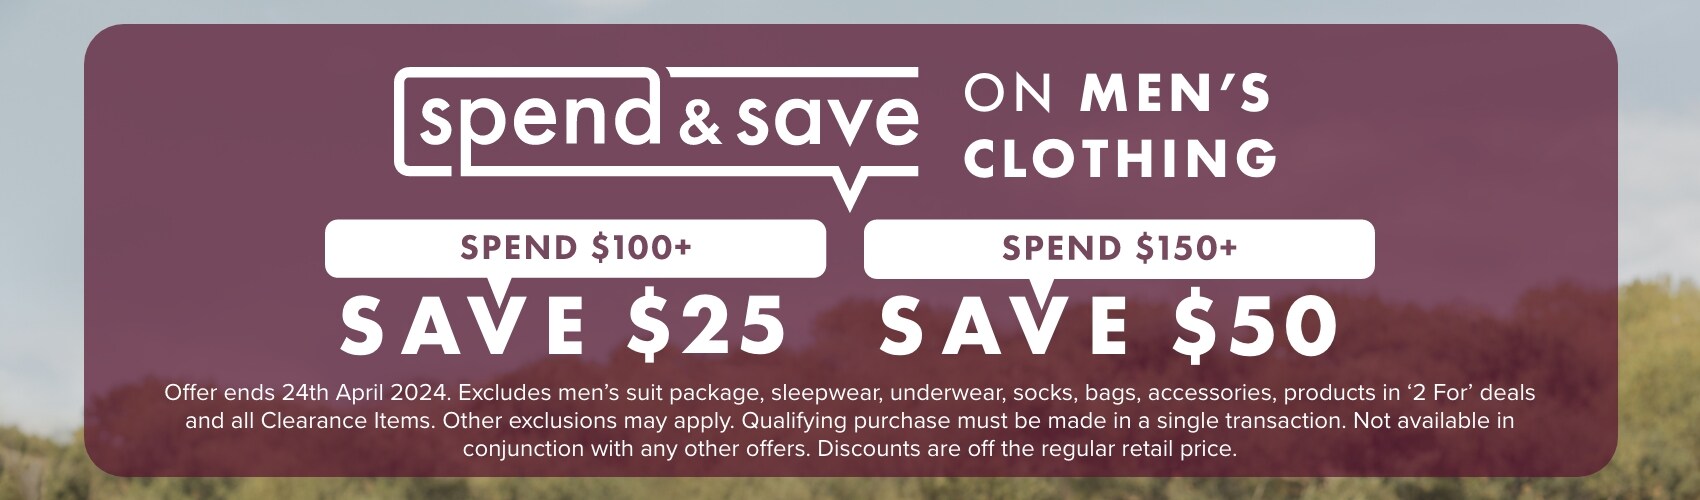 Spend & Save Men's Clothing